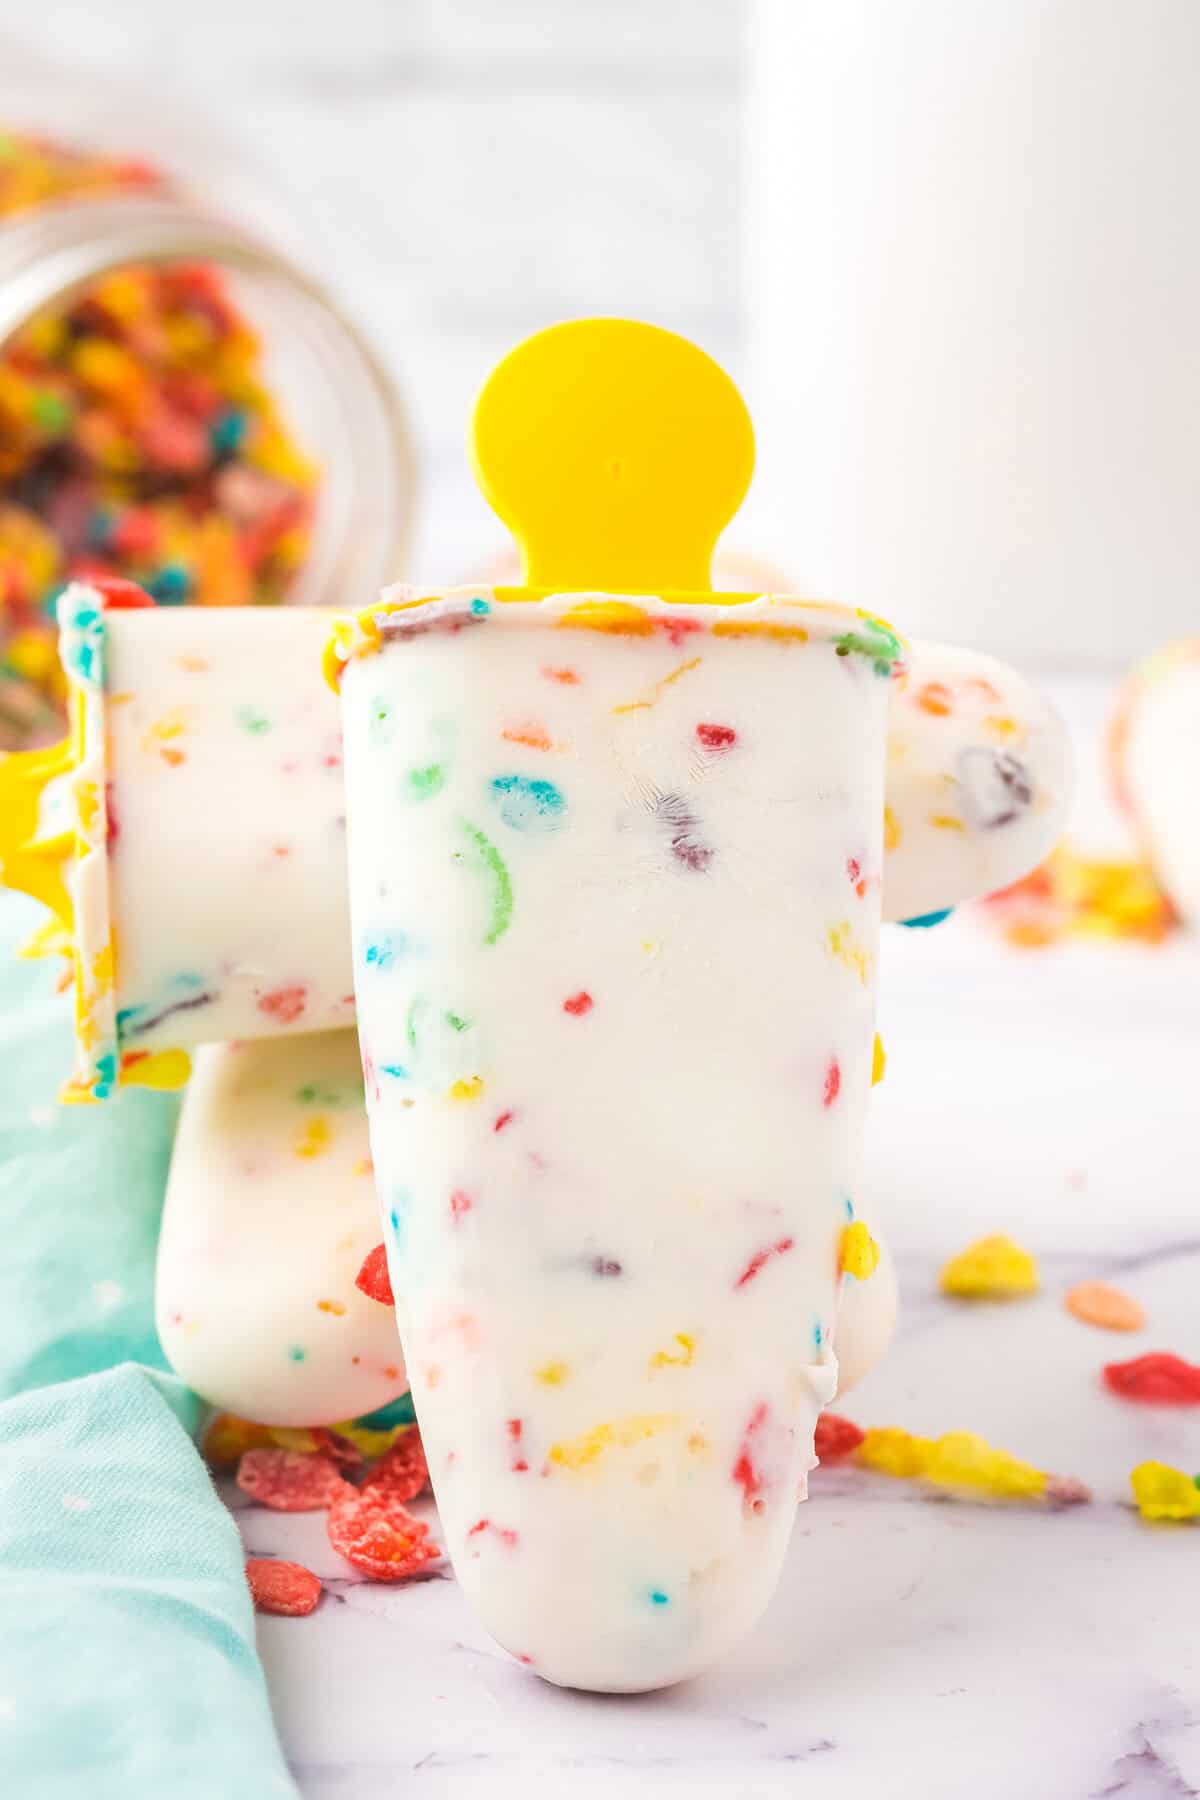 Fruity Pebbles Cereal Popsicles made with Greek Yogurt.